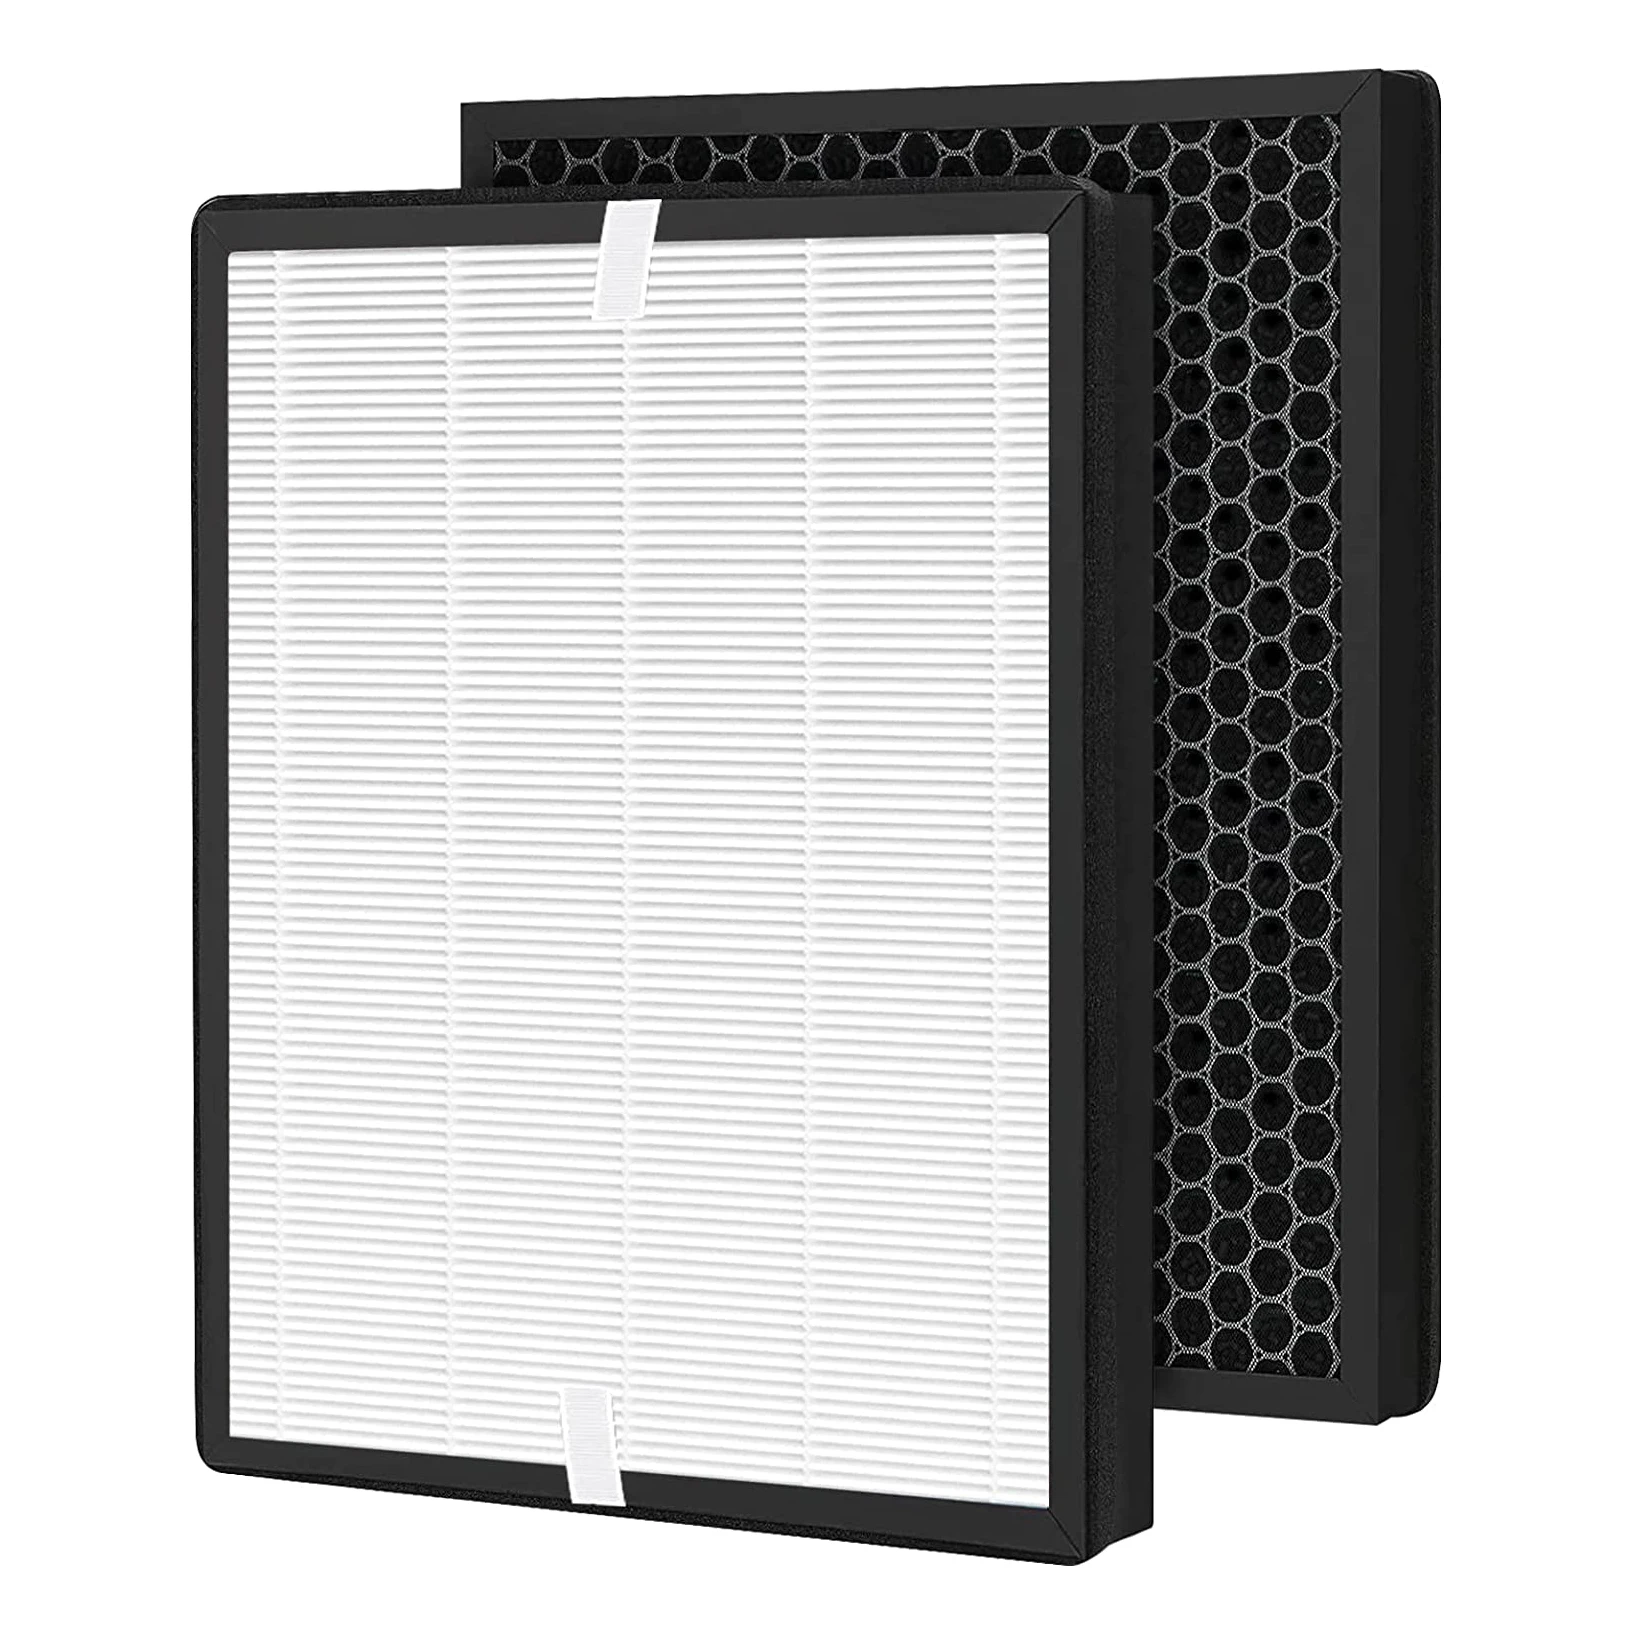 FA500 True HEPA & Activated Carbon Filter Replacement Set Compatible with FAMREE FA500 and Aiper KJ200 Air Cleaner Purifiers